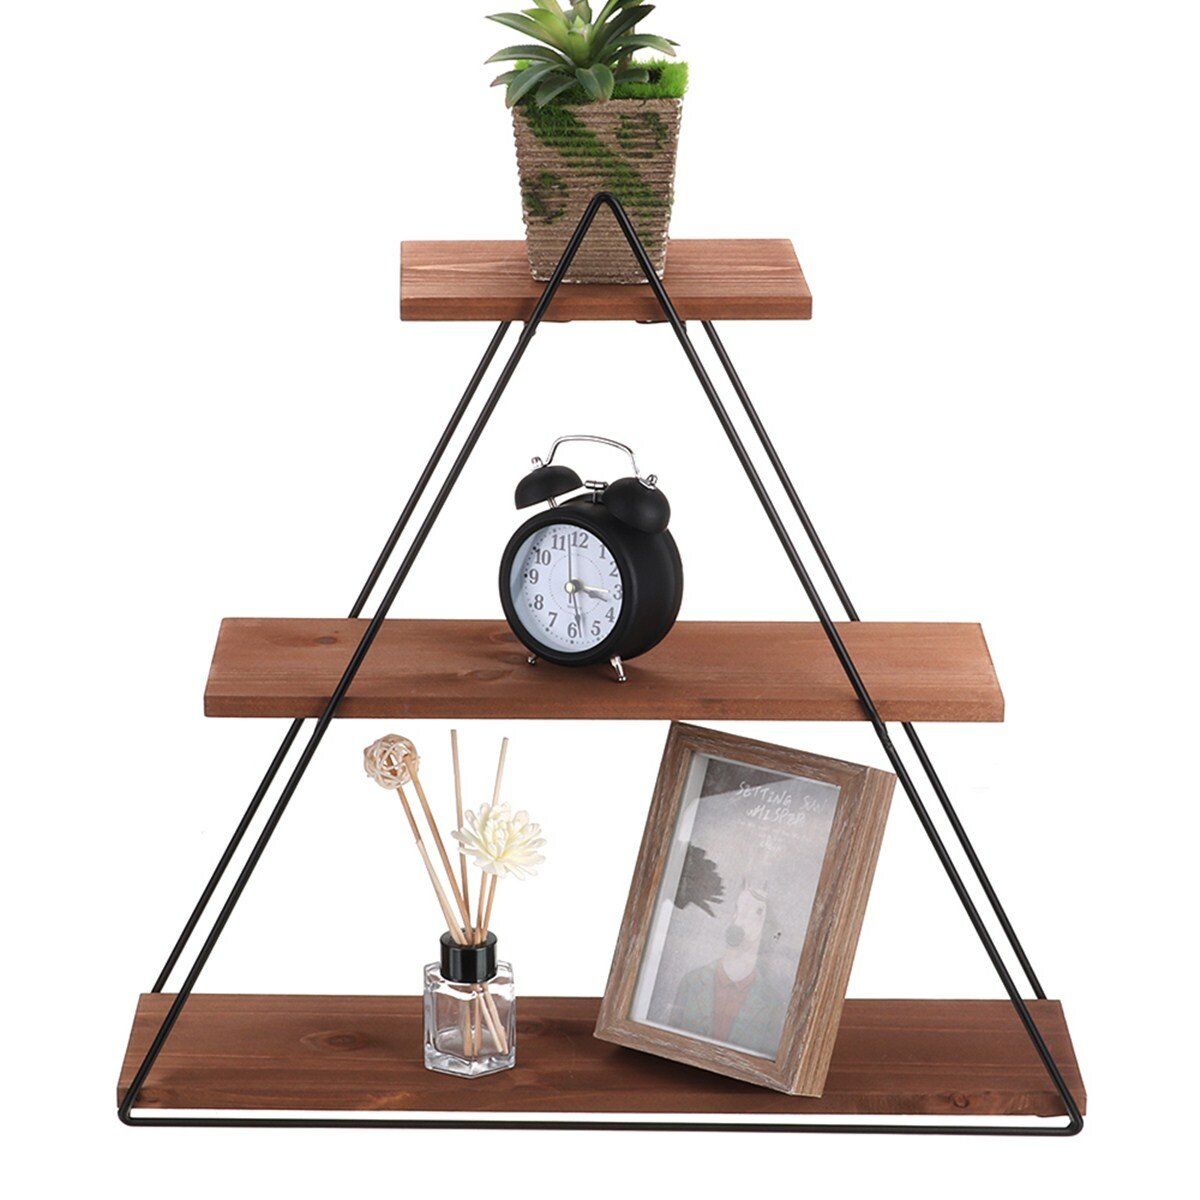 

3-Tier Triangular Wall Mounted Shelf Floating Shelves Metal Display Rack Home Hanging Stand Decor For Living Room Office